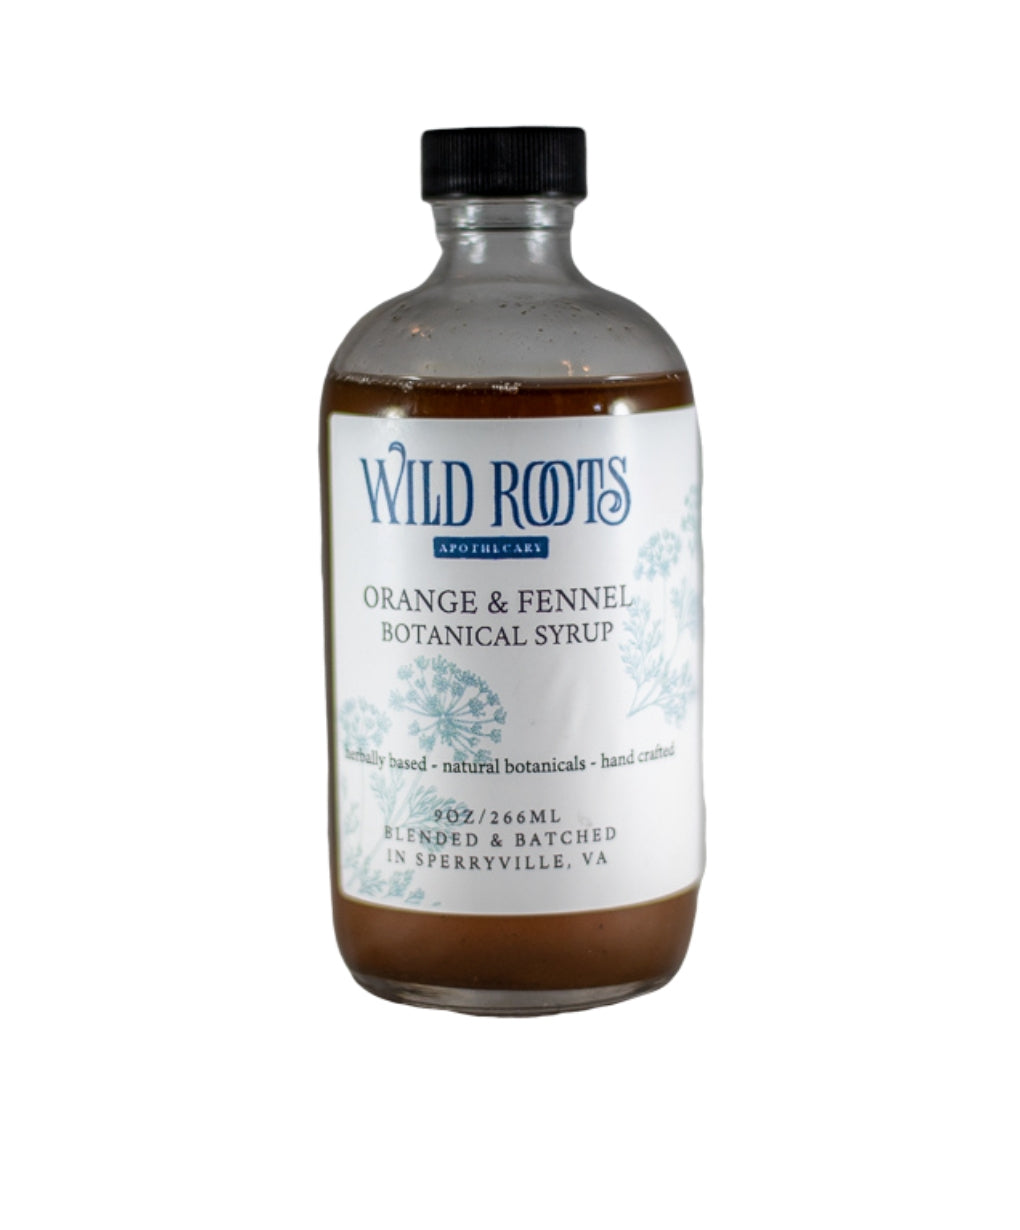 Orange Fennel Botanical Syrup—Wild Roots Apothecary